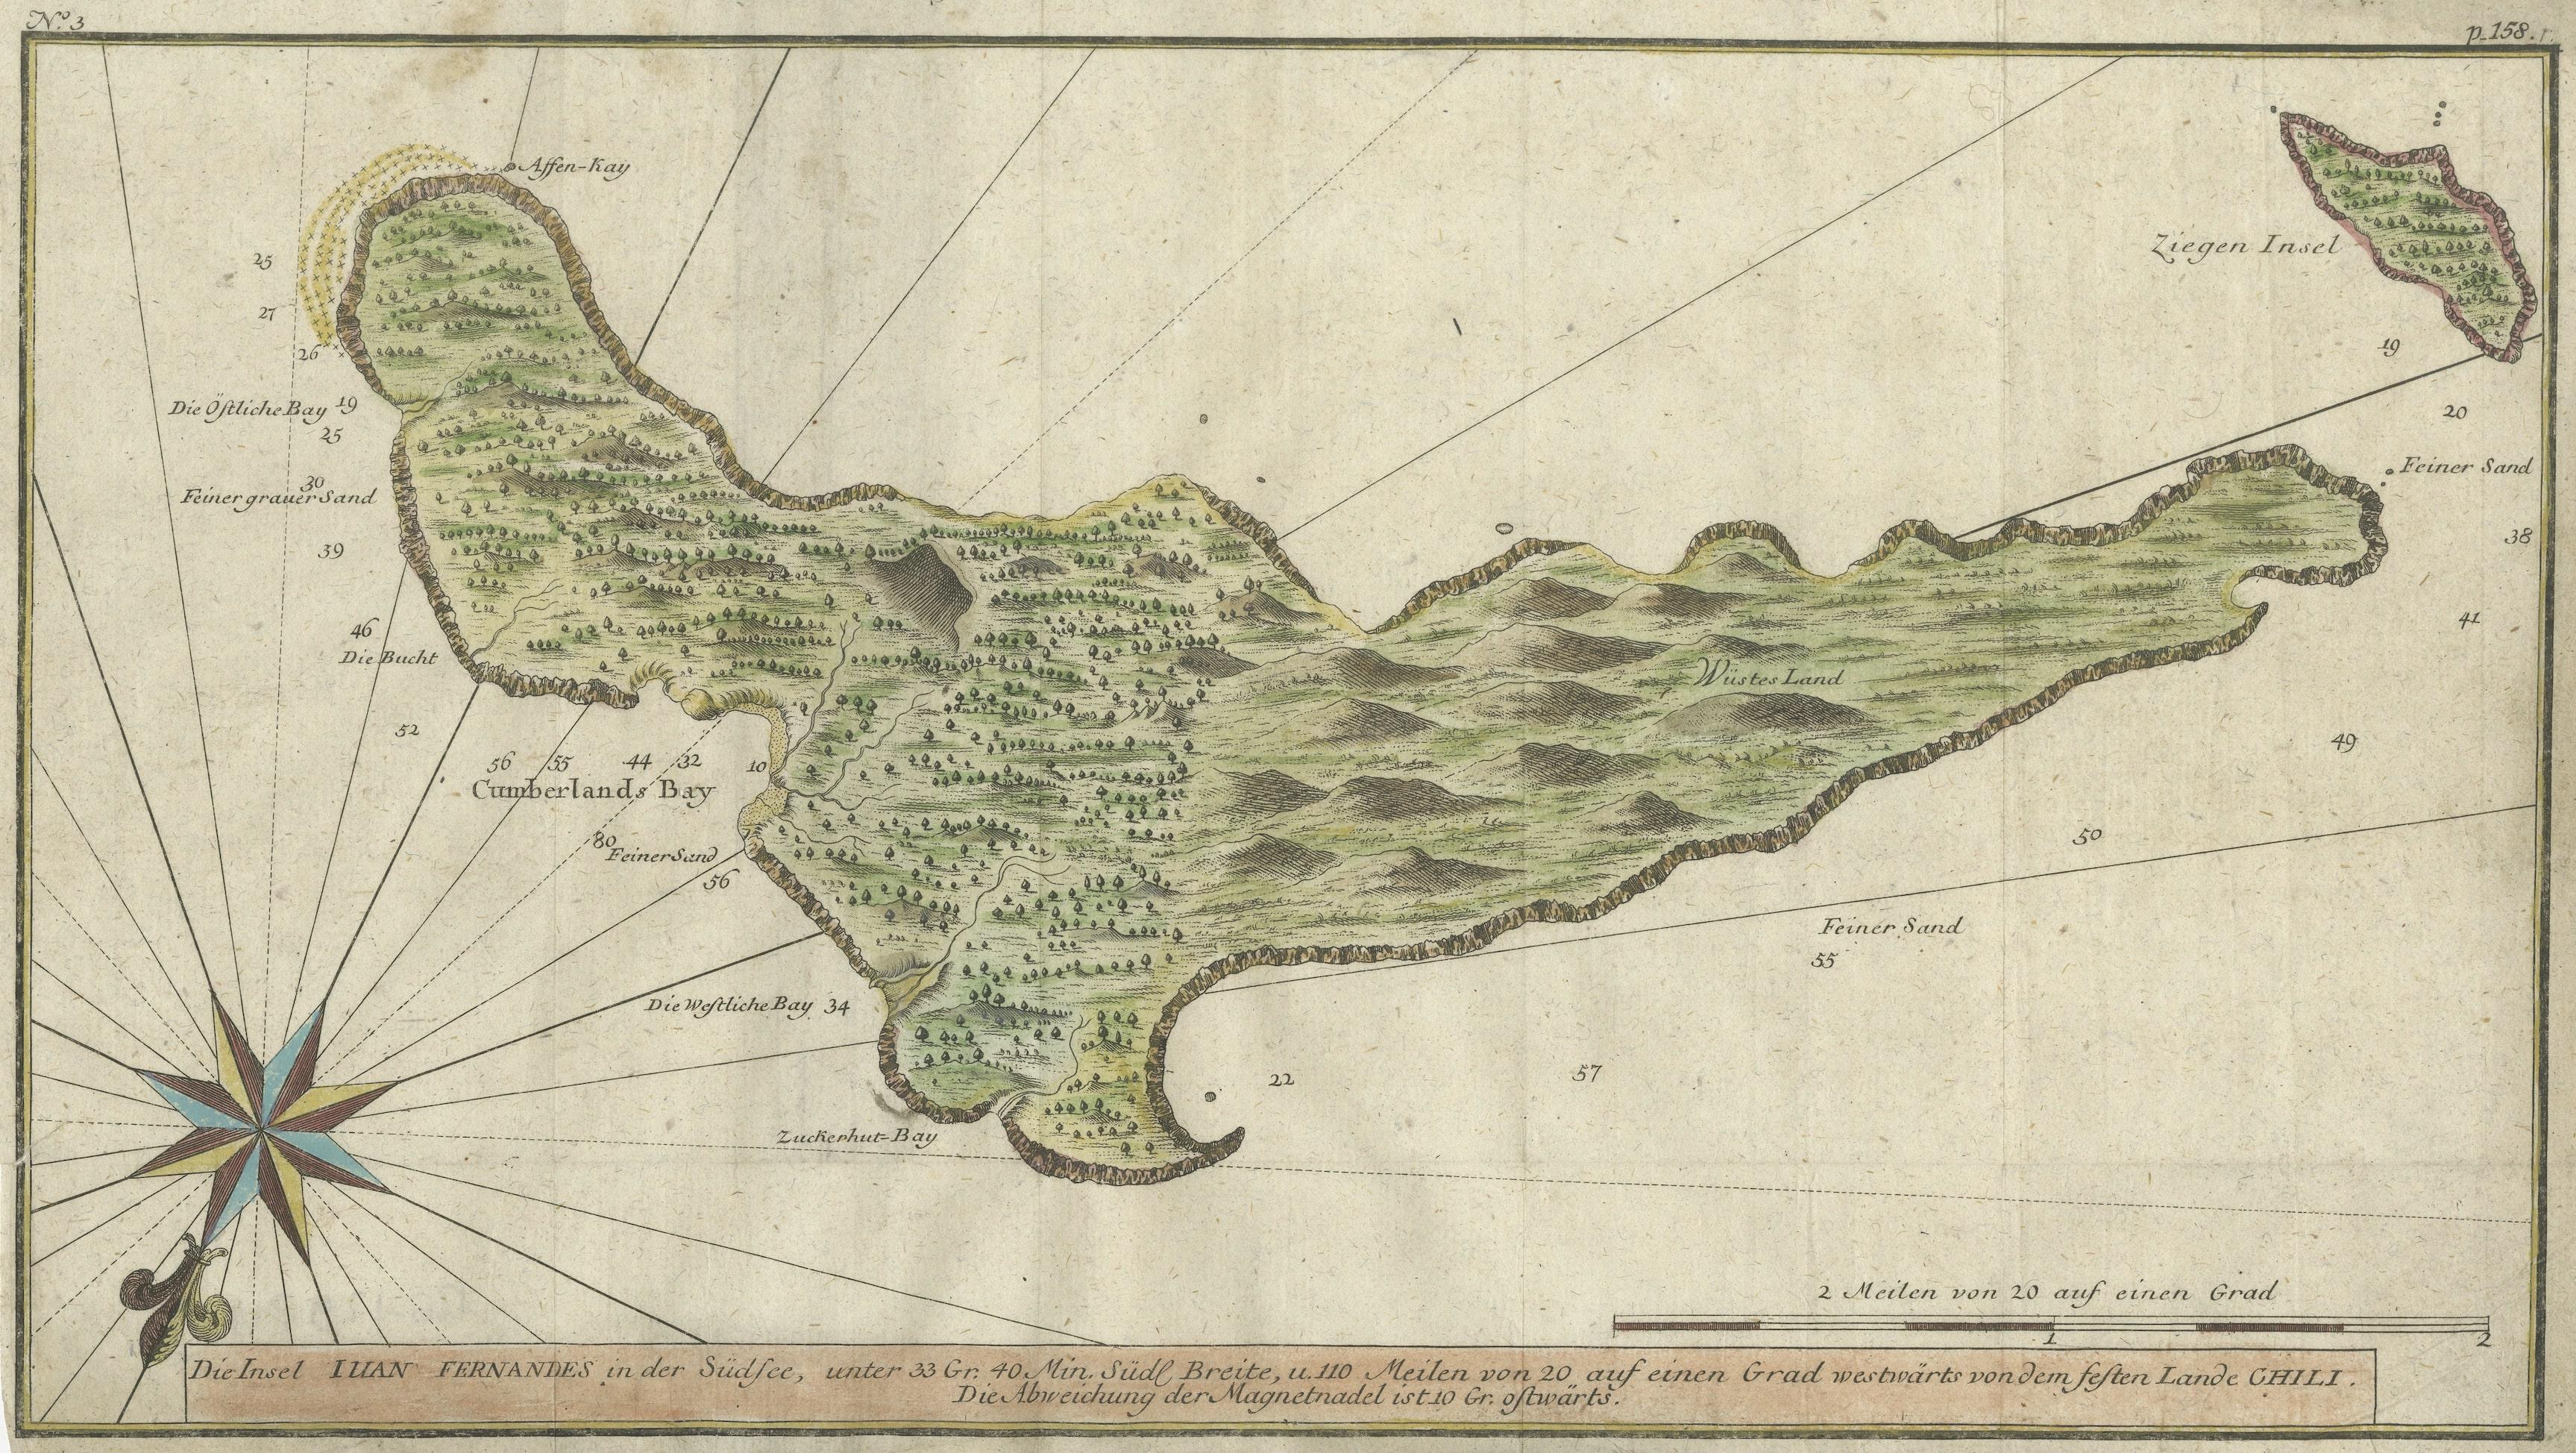 Antique map titled 'Die Insel Iuan Fernandes in der Sudsee (..)'. This map depicts Robinson Crusoe, one of the Juan Fernández Islands. 

Robinson Crusoe Island, formerly known as Más a Tierra, is the second largest of the Juan Fernández Islands.